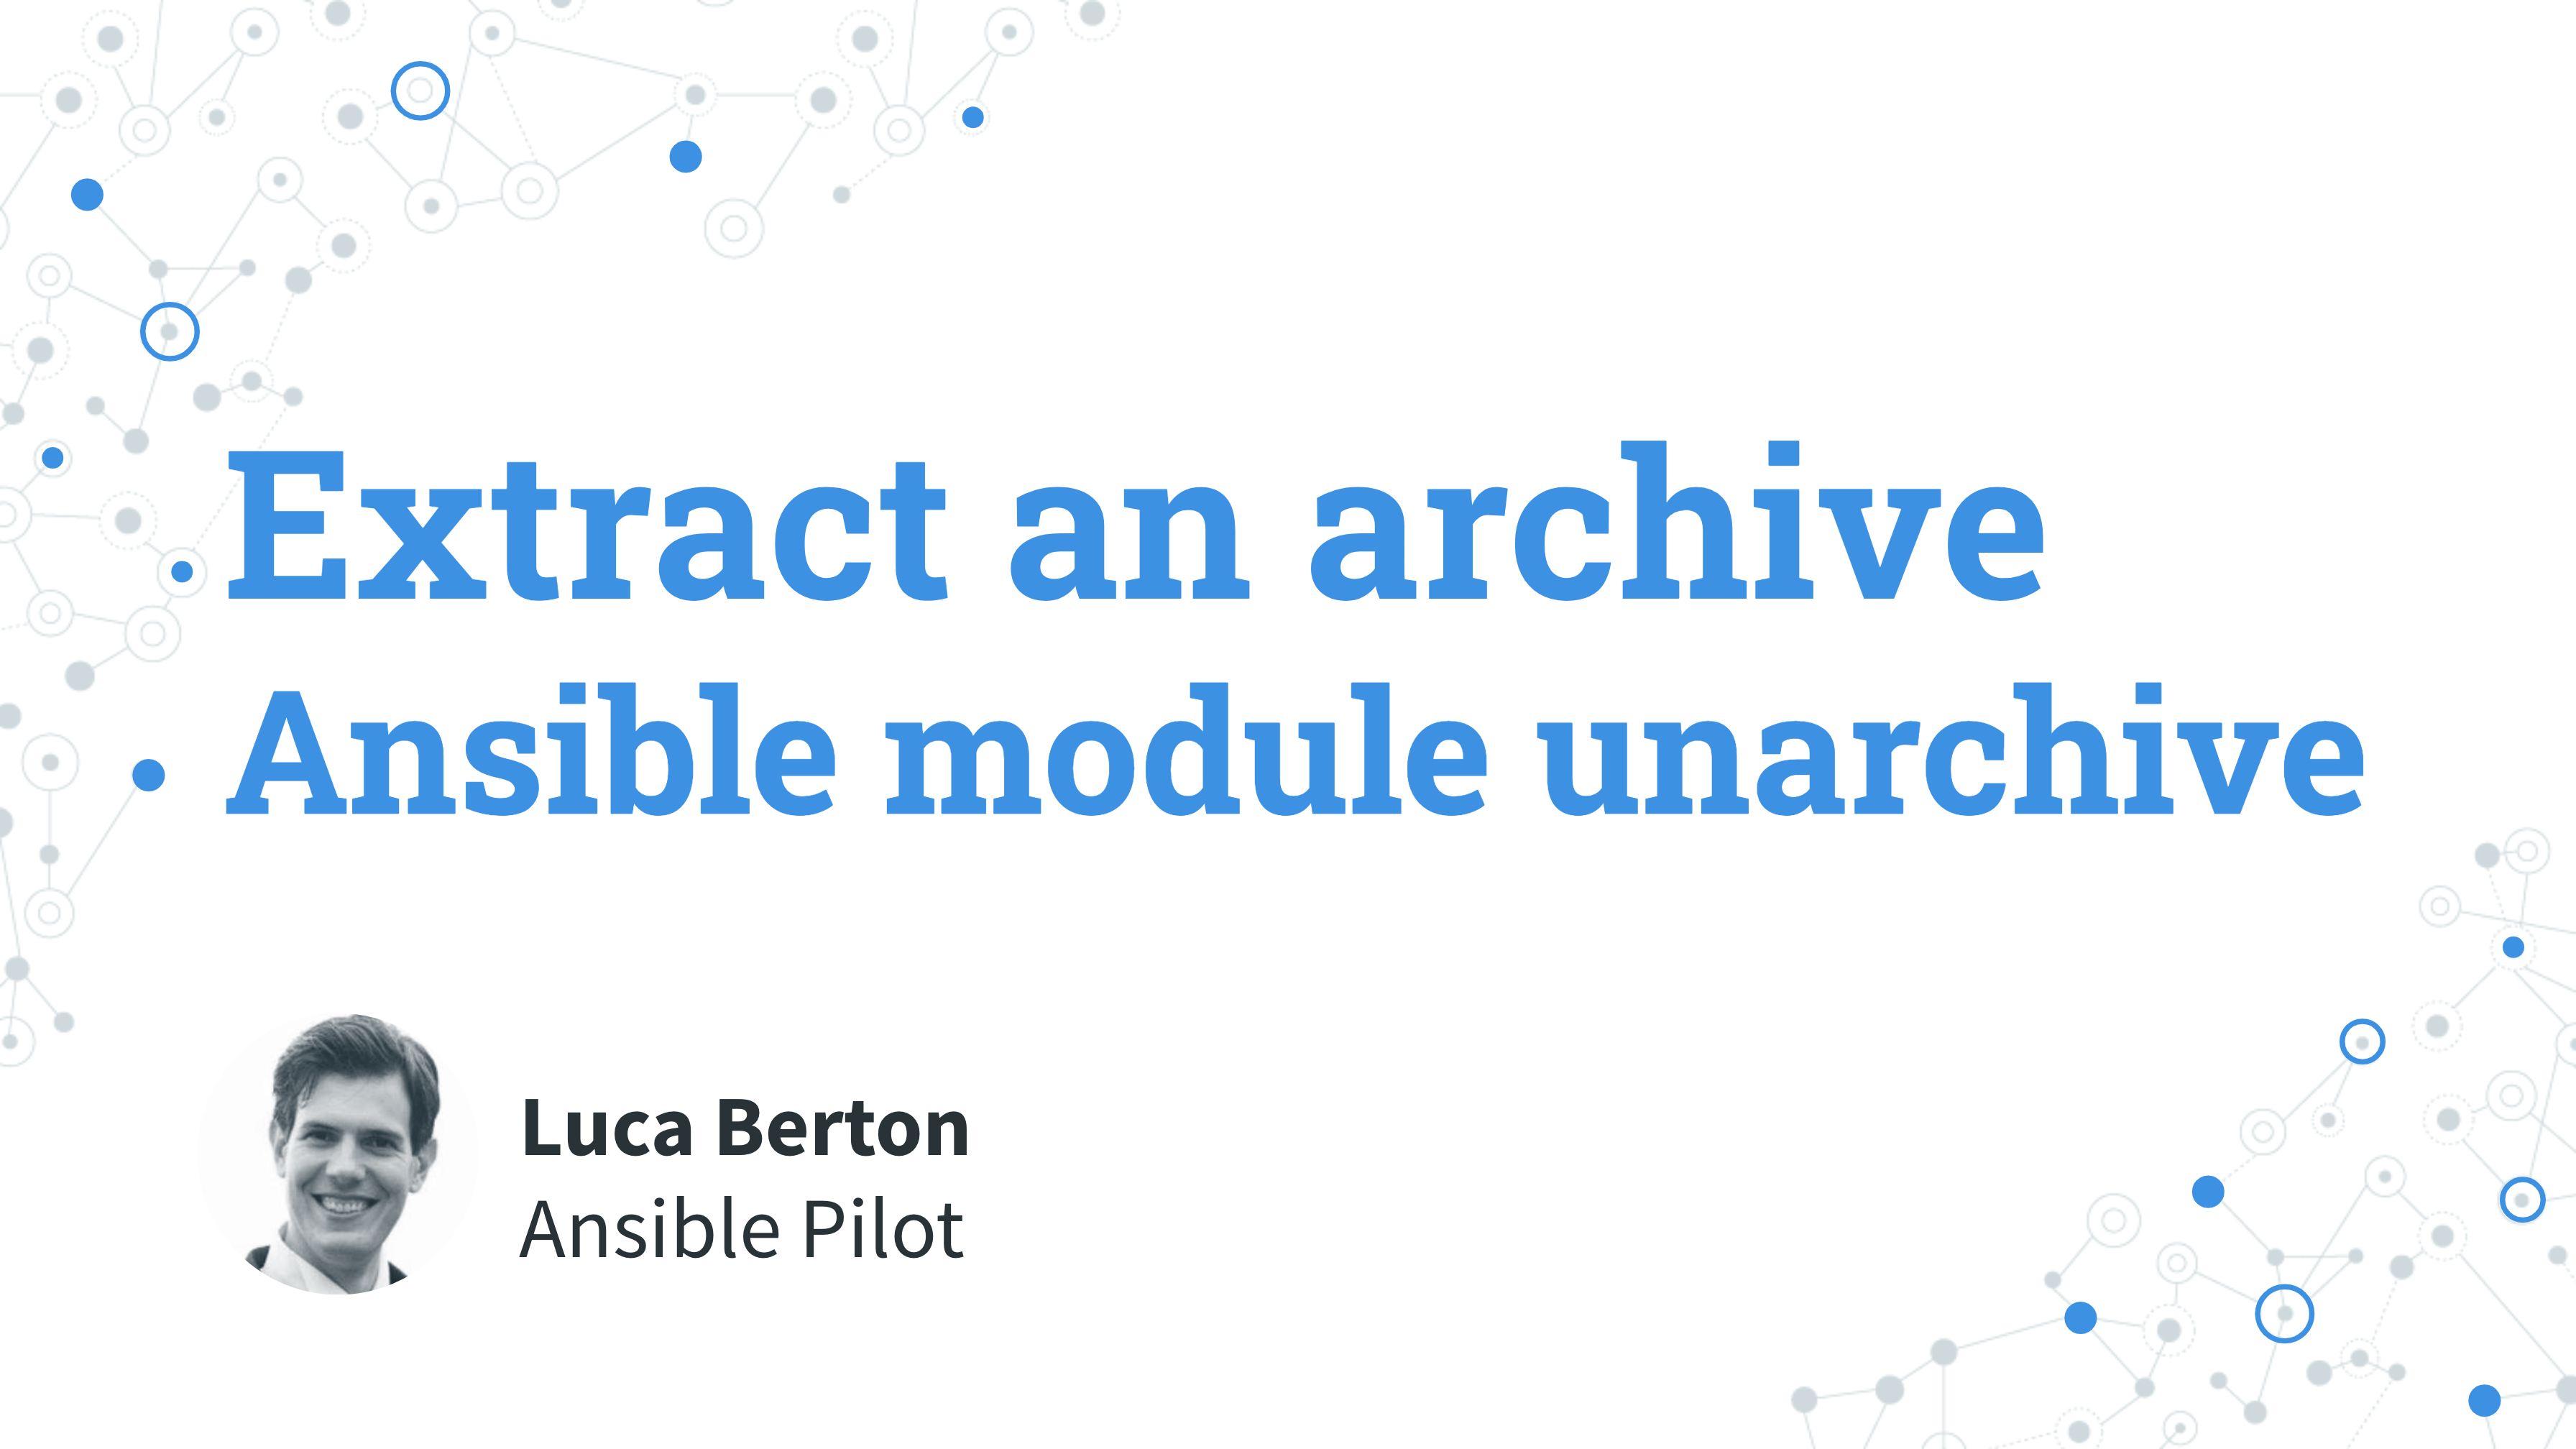 Extract an archive - Ansible module unarchive